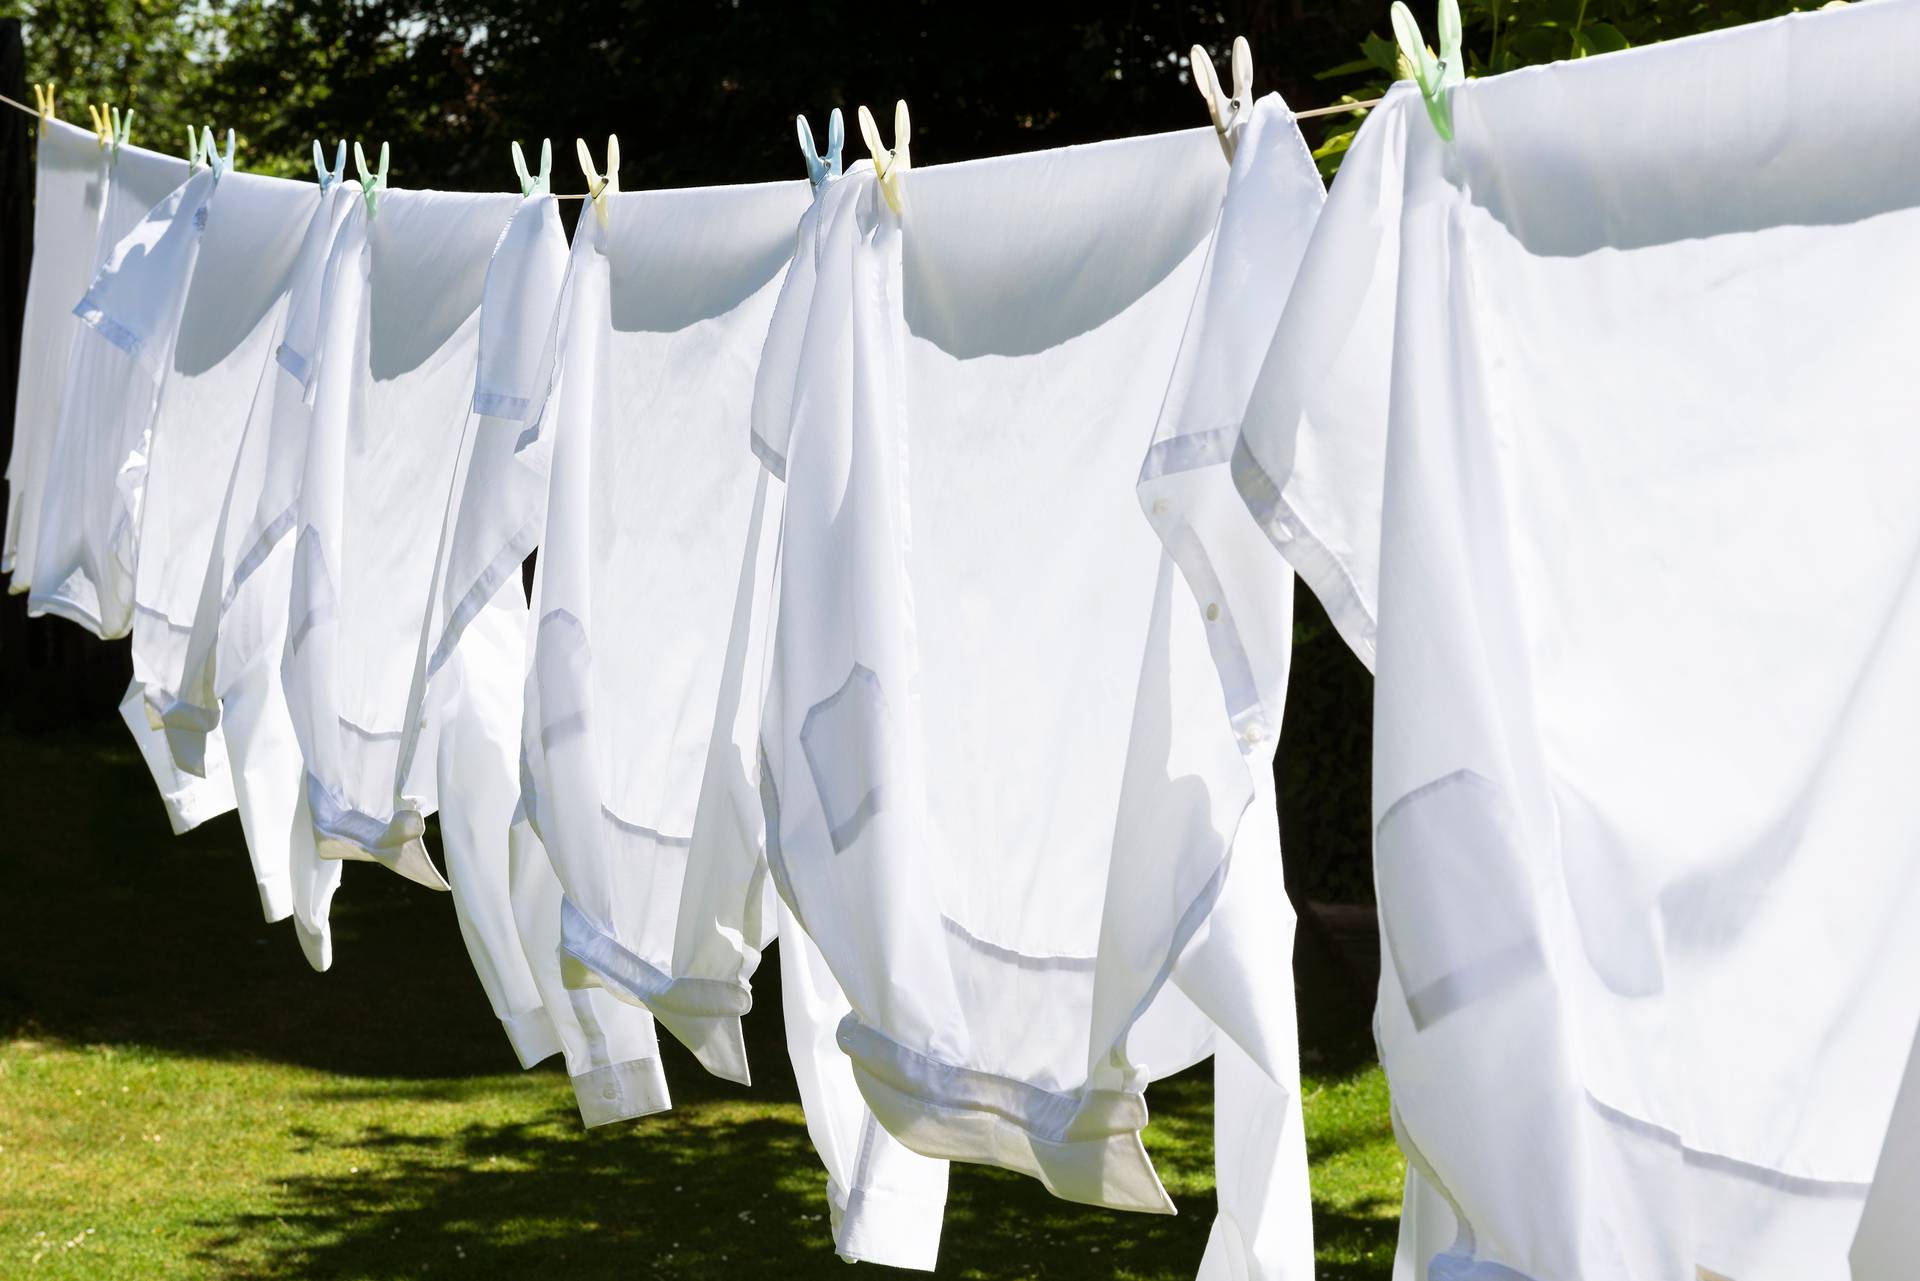 How to wash white clothes: a complete guide